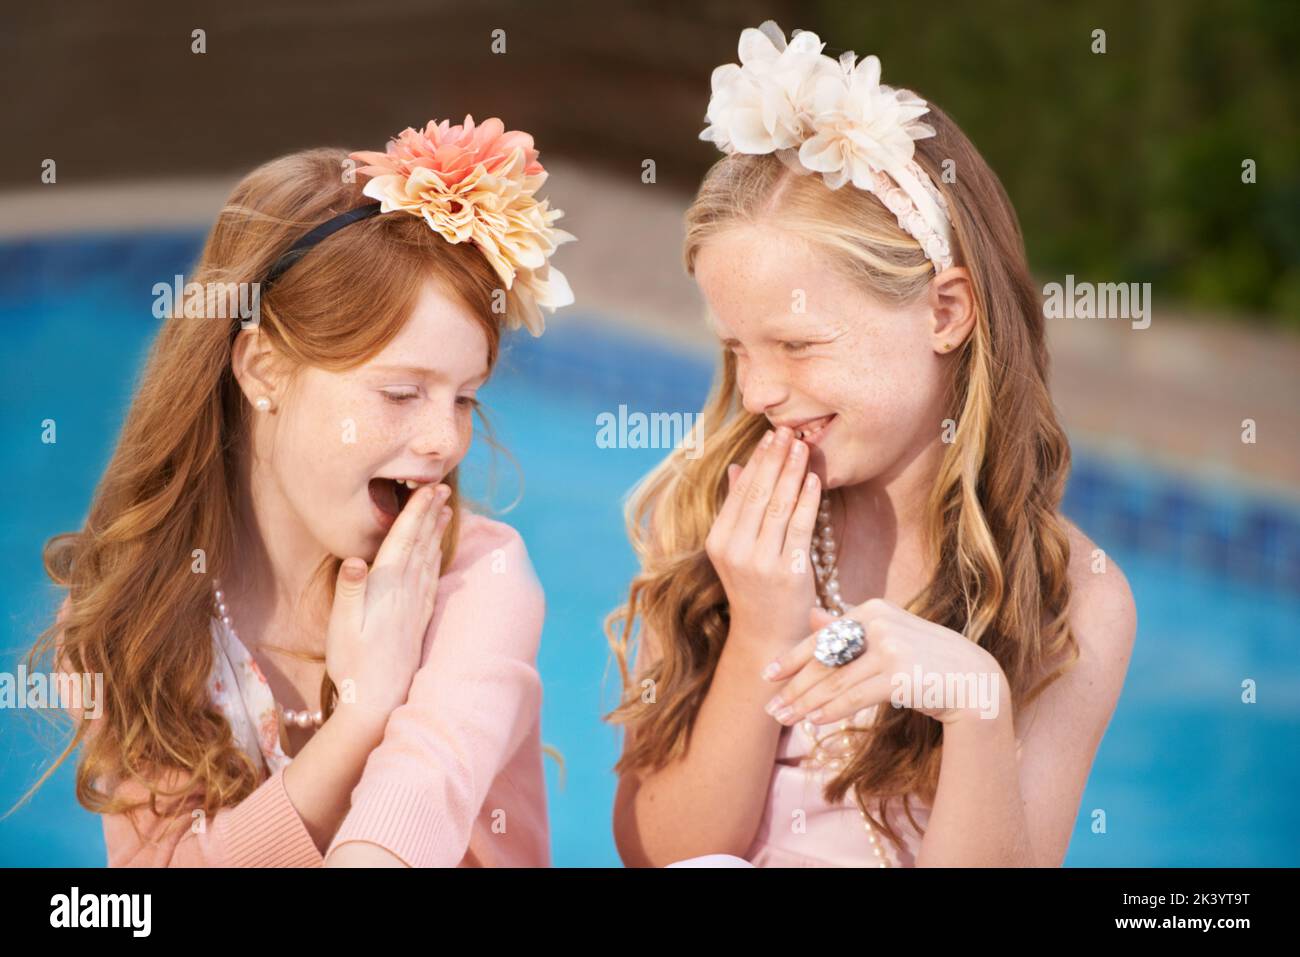 Having fun with her friend. Two little girls dressed up in fancy clothes. Stock Photo